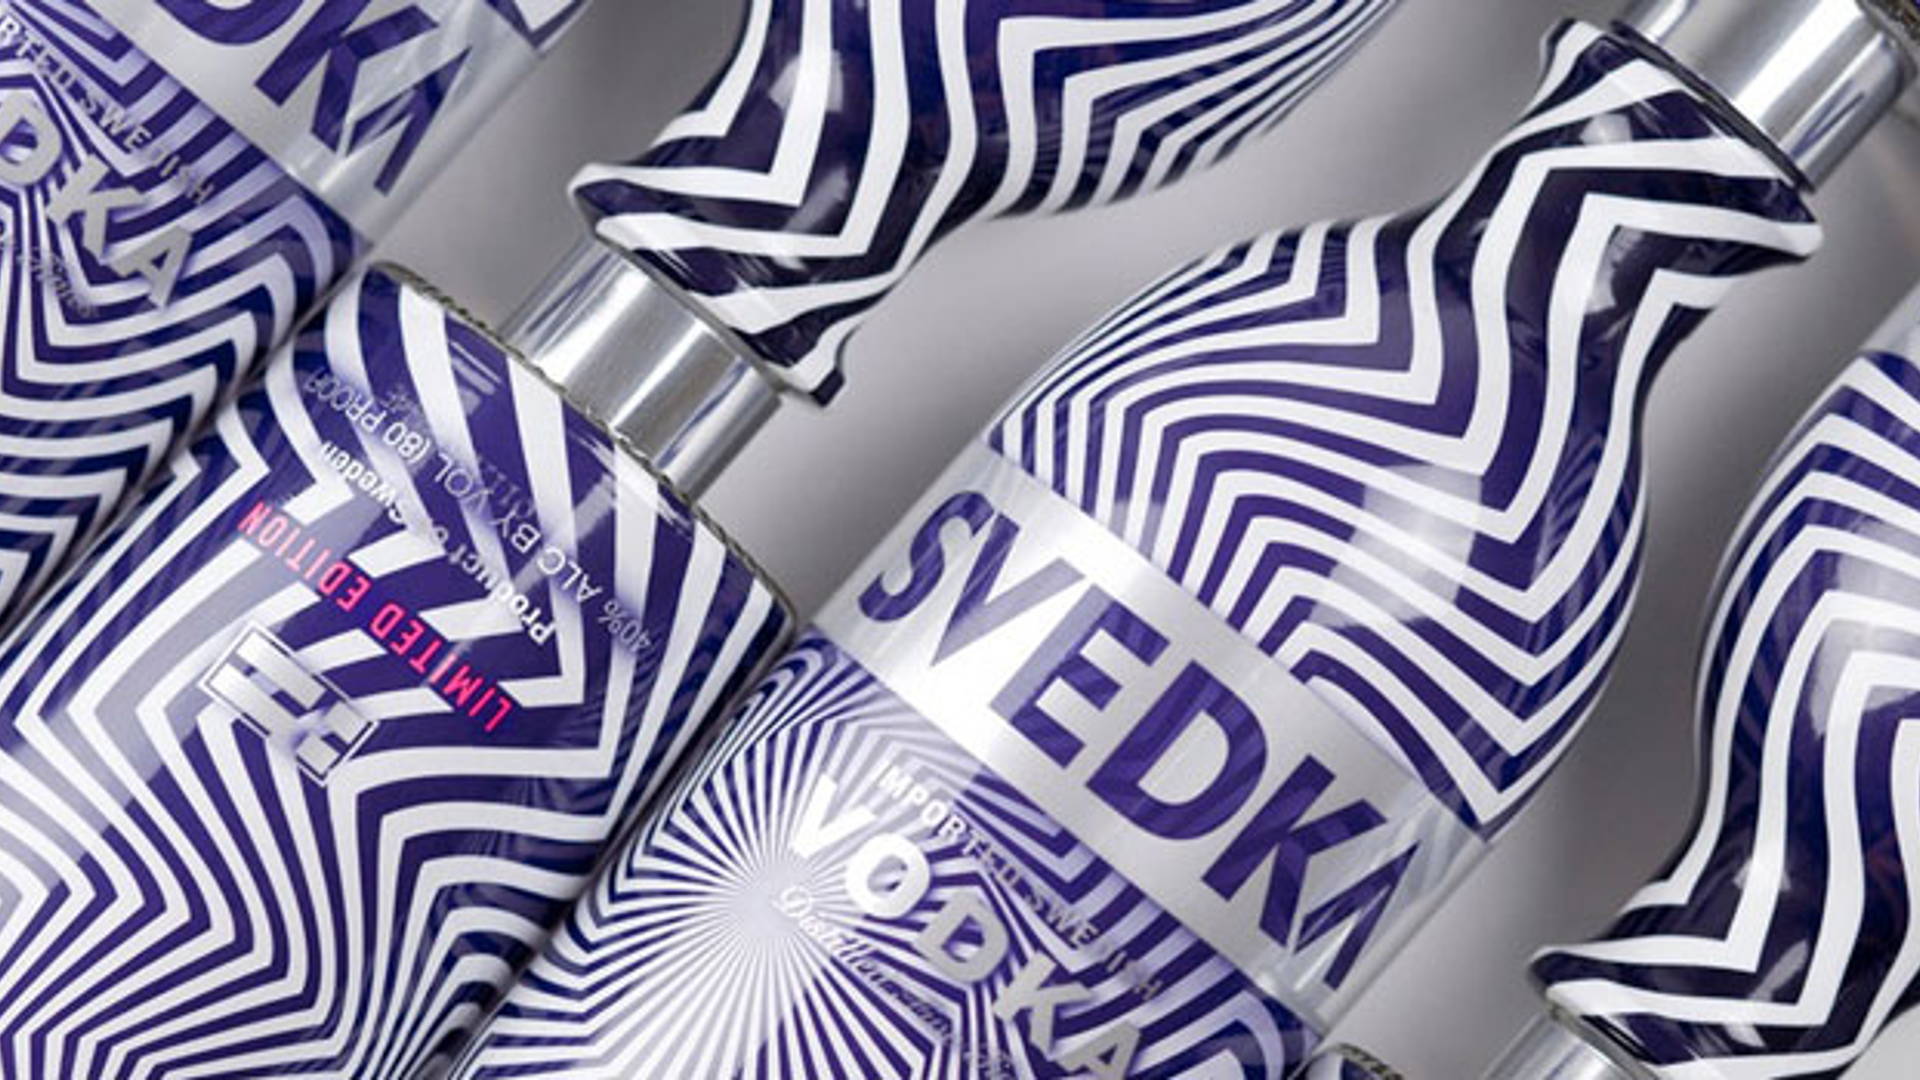 Featured image for Svedka Limited Edition Packaging